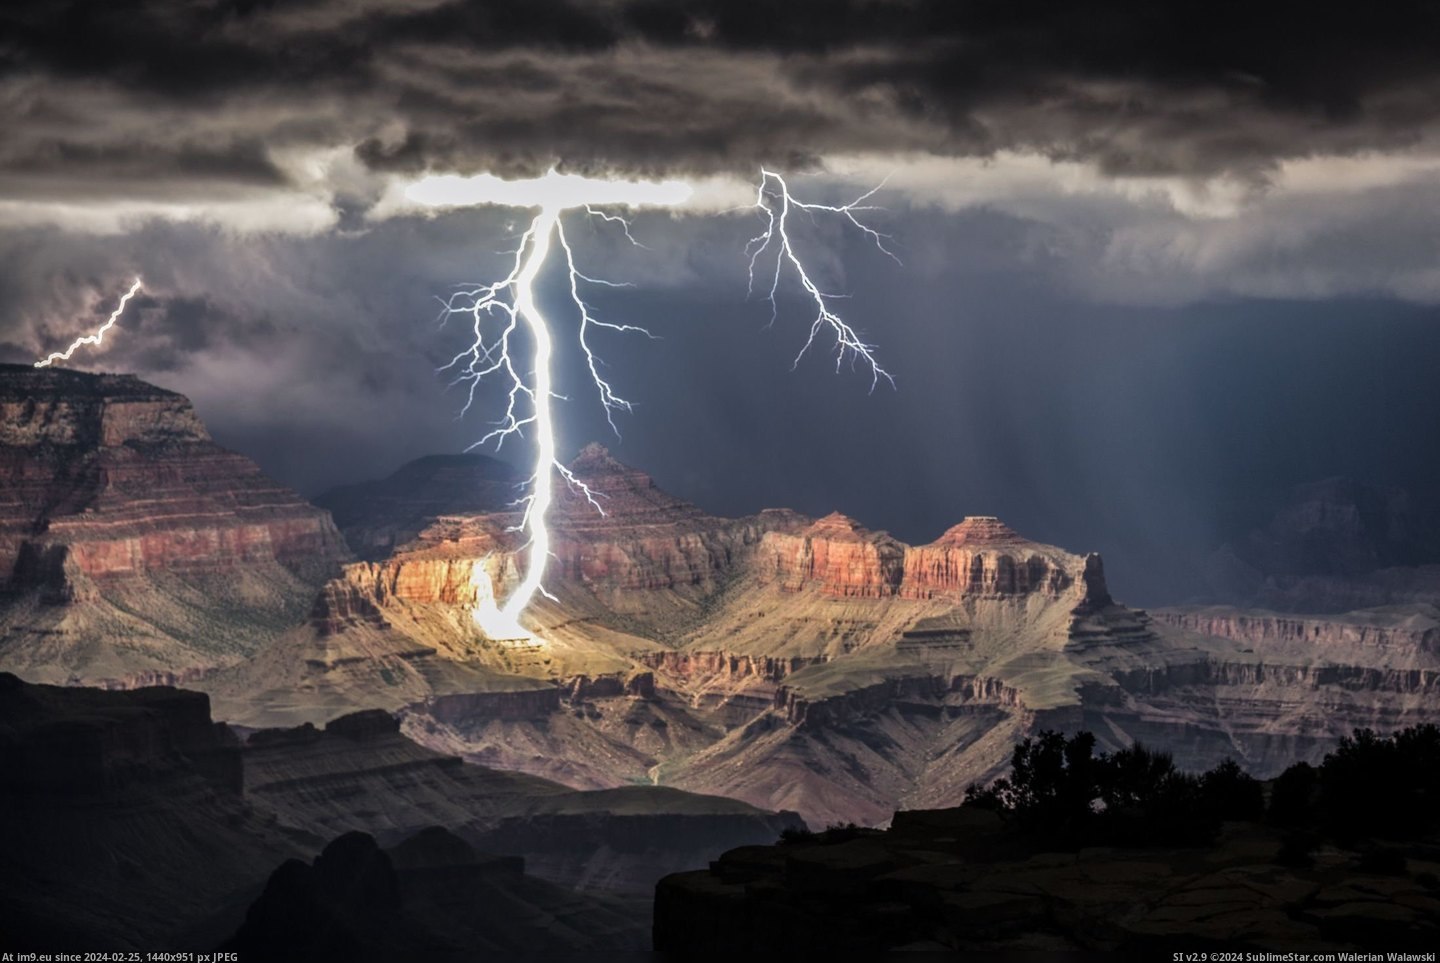 #Canyon #Lightning #Lit #Grand [Pics] The Grand Canyon lit only by lightning Pic. (Изображение из альбом My r/PICS favs))